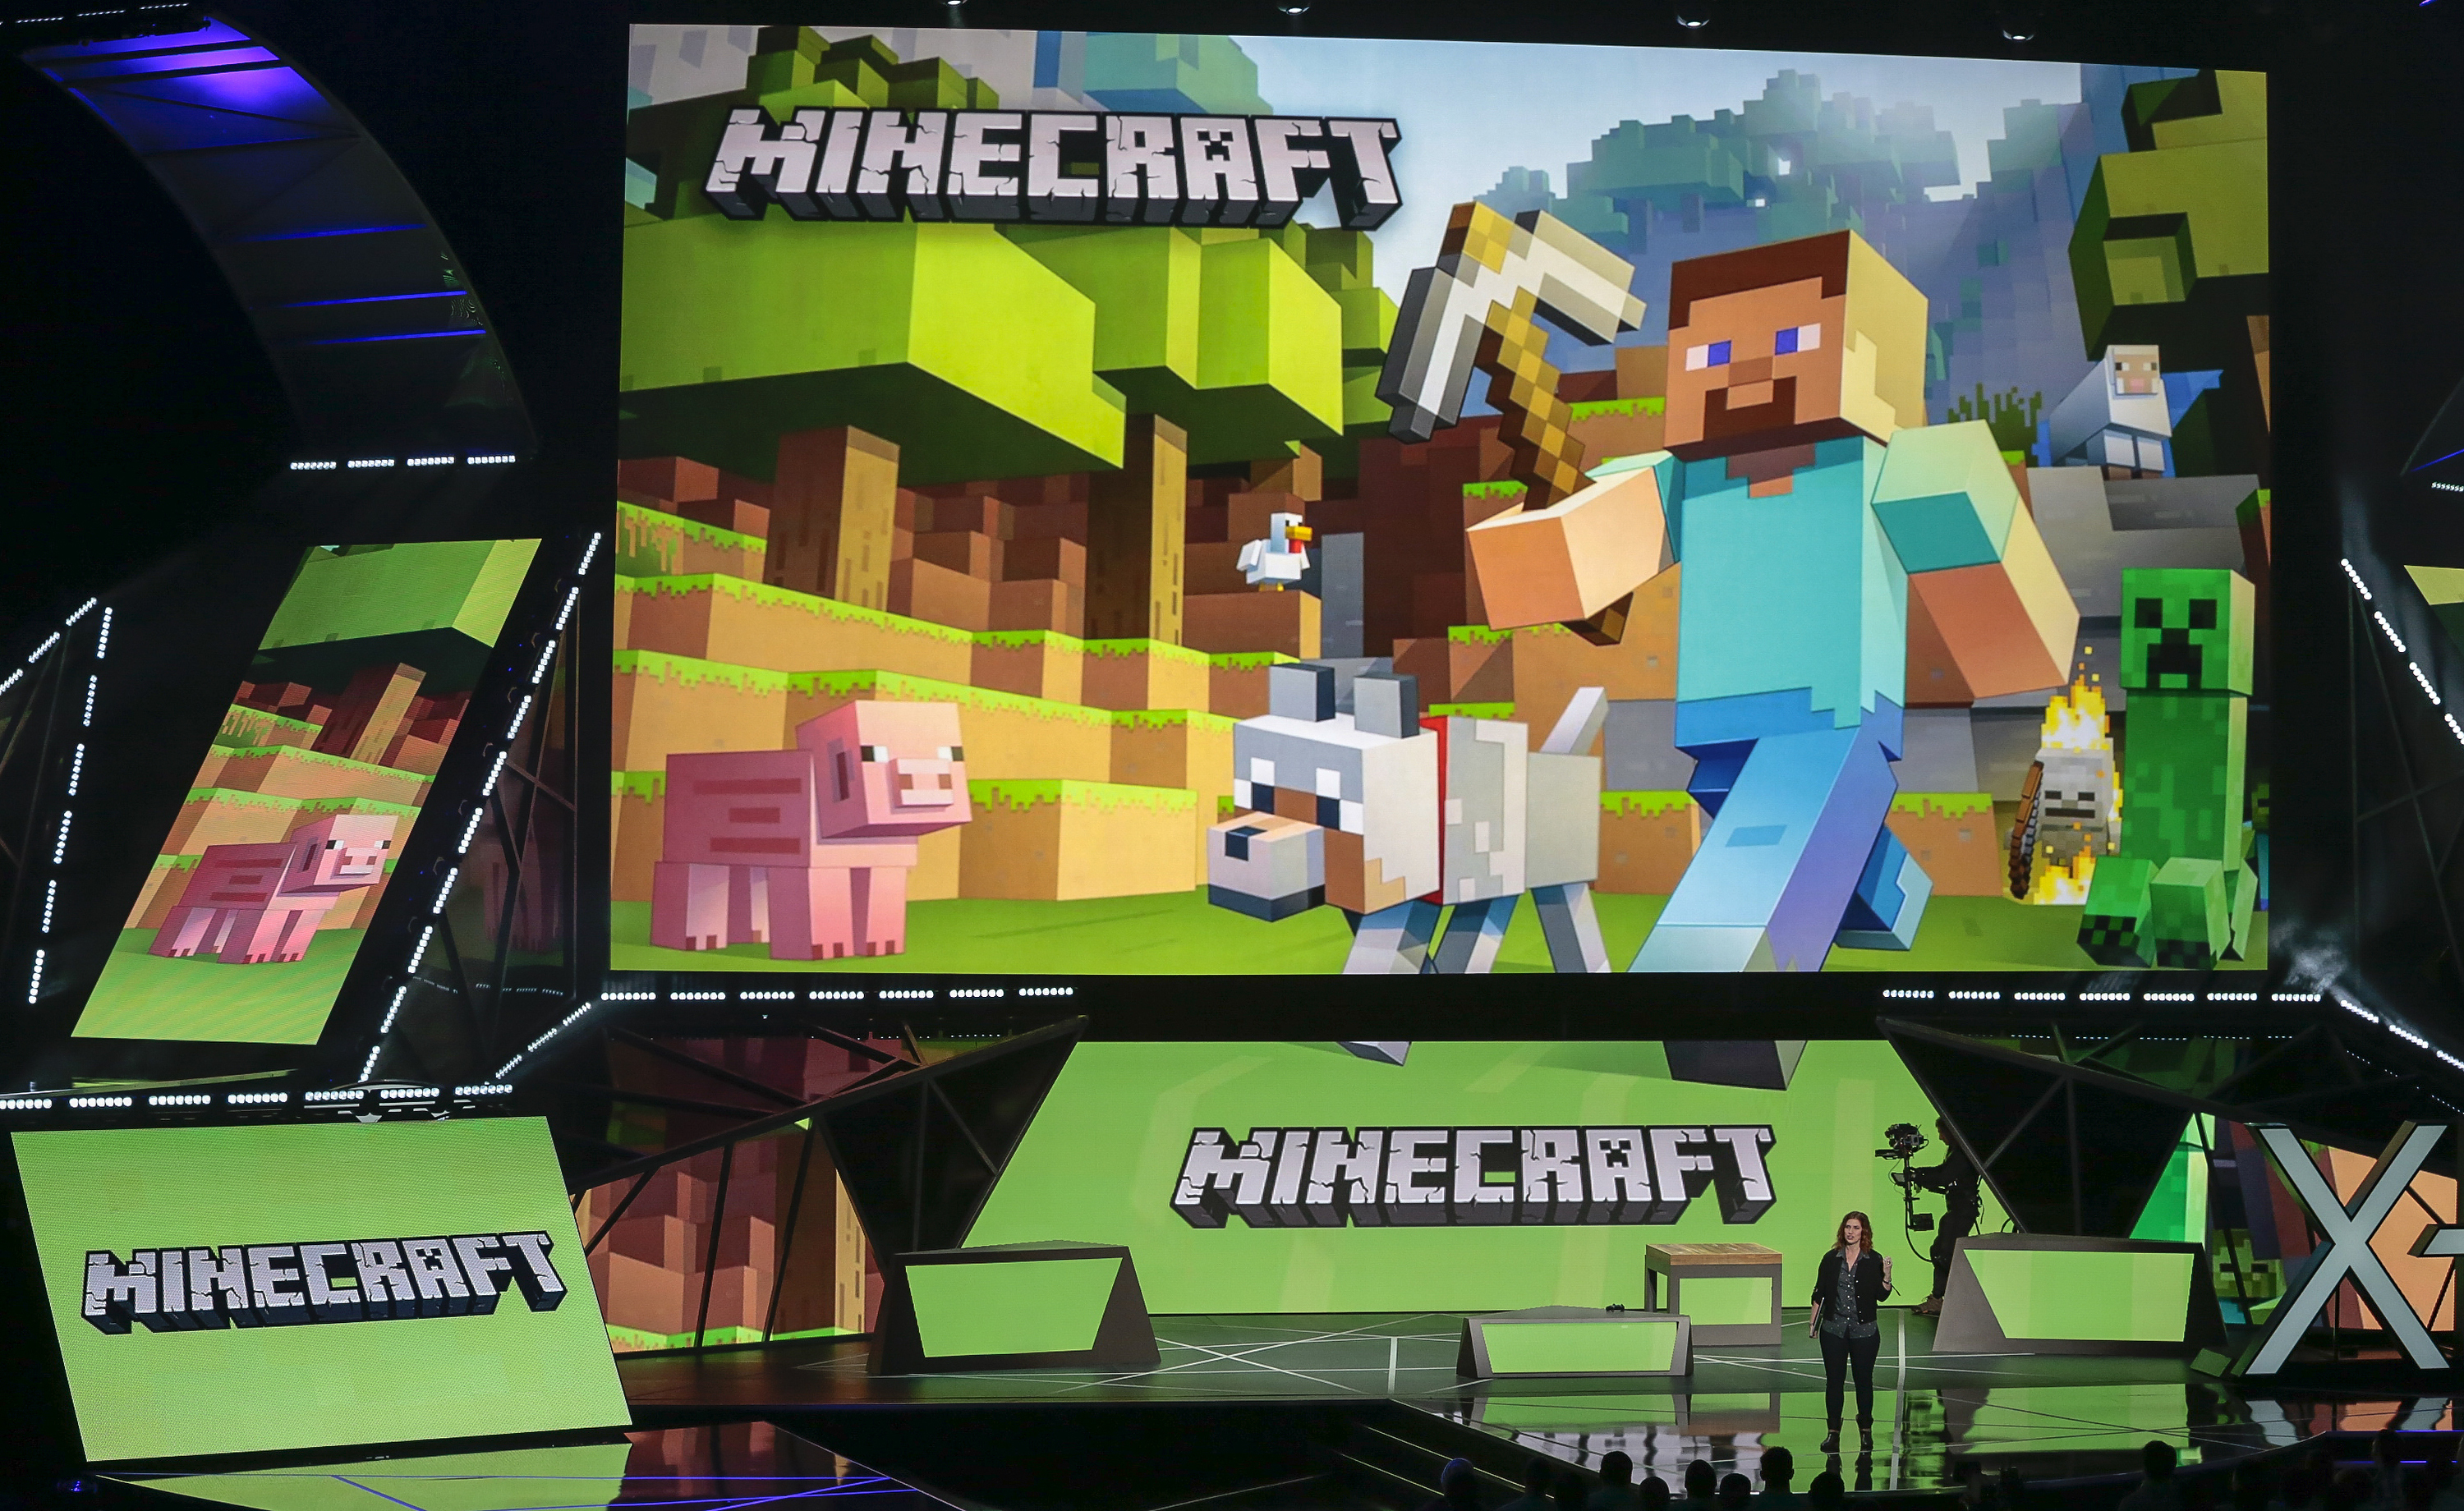 FILE - Lydia Winters shows off Microsoft's "Minecraft" built specifically for HoloLens at the Xbox E3 2015 briefing before Electronic Entertainment Expo, June 15, 2015, in Los Angeles. Security experts around the world raced Friday, Dec. 10, 2021, to patch one of the worst computer vulnerabilities discovered in years, a critical flaw in open-source code widely used across industry and government in cloud services and enterprise software. Cybersecurity experts say users of the online game Minecra